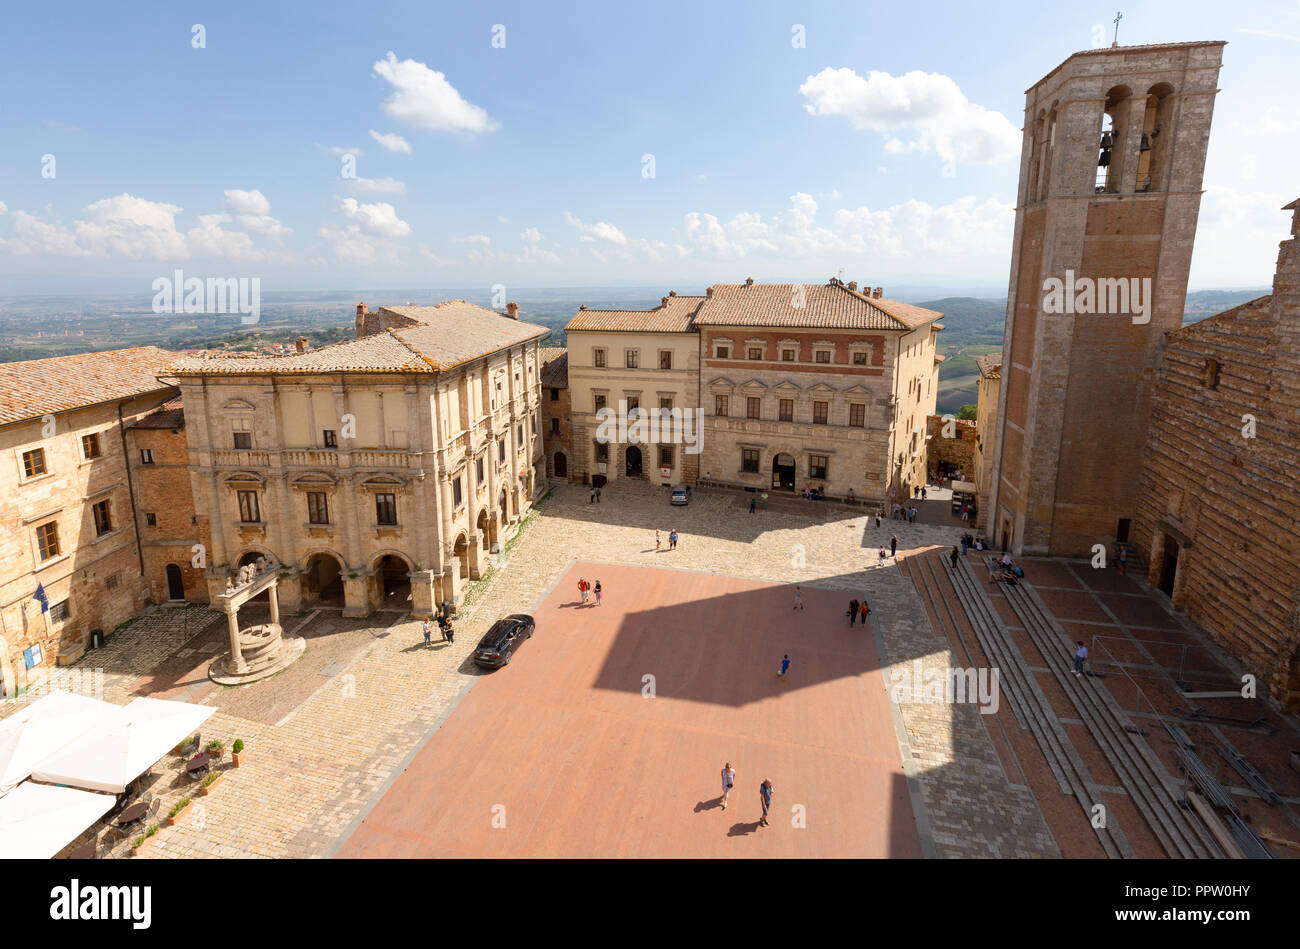 Montepulciano Tuscany Italy - the Piazza Grande seen from the Palazzo, Montepulciano medieval town, Montepulciano, Tuscany Italy Europe Stock Photo